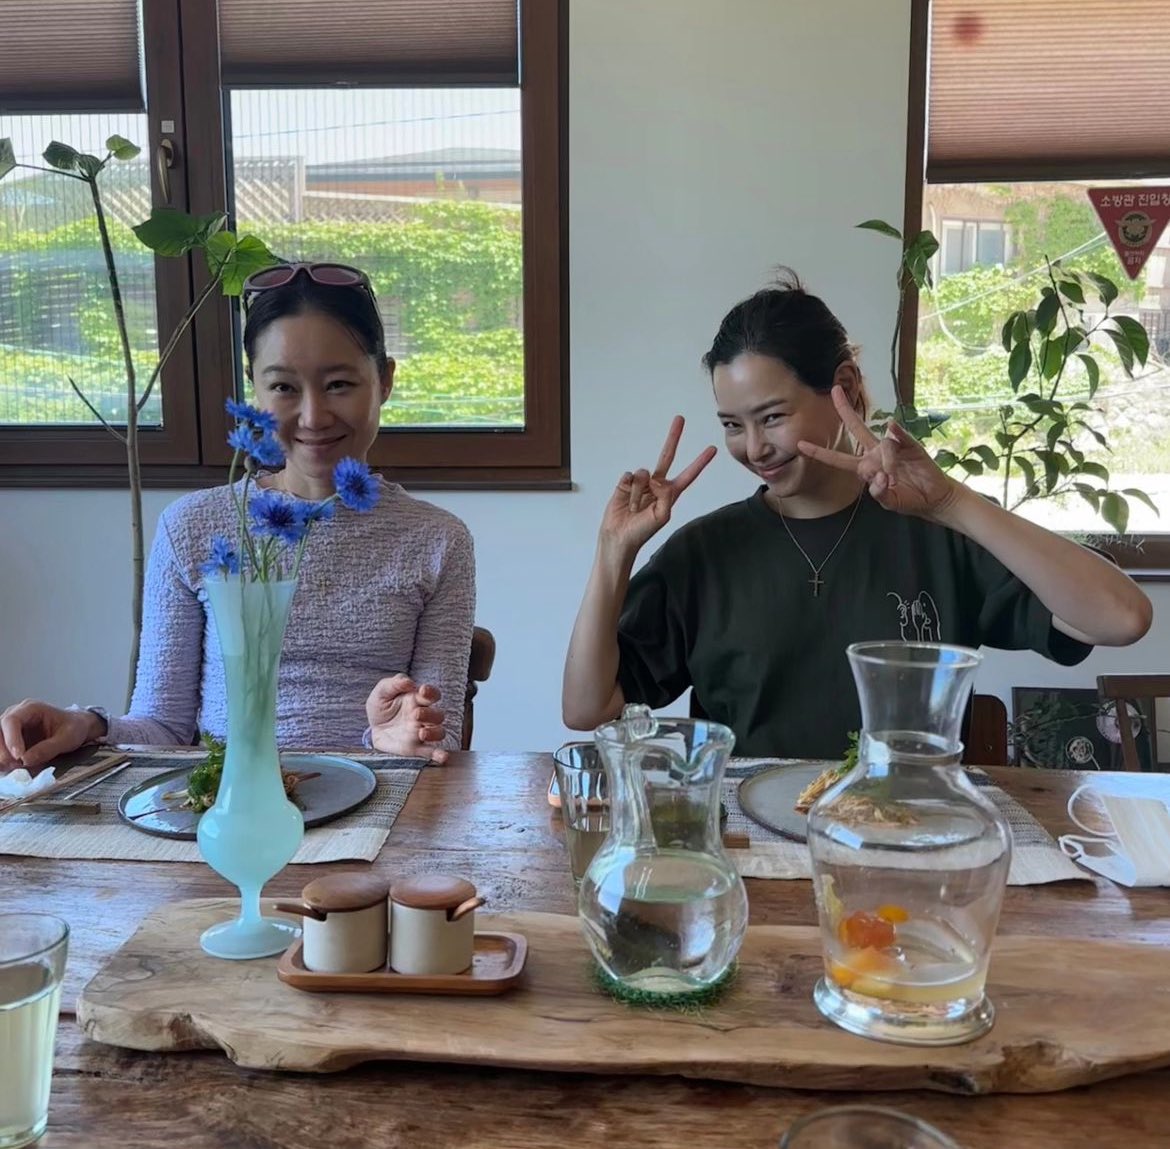 kong hyojin, honey lee, jung hoyeon and park sodam are having lunch together